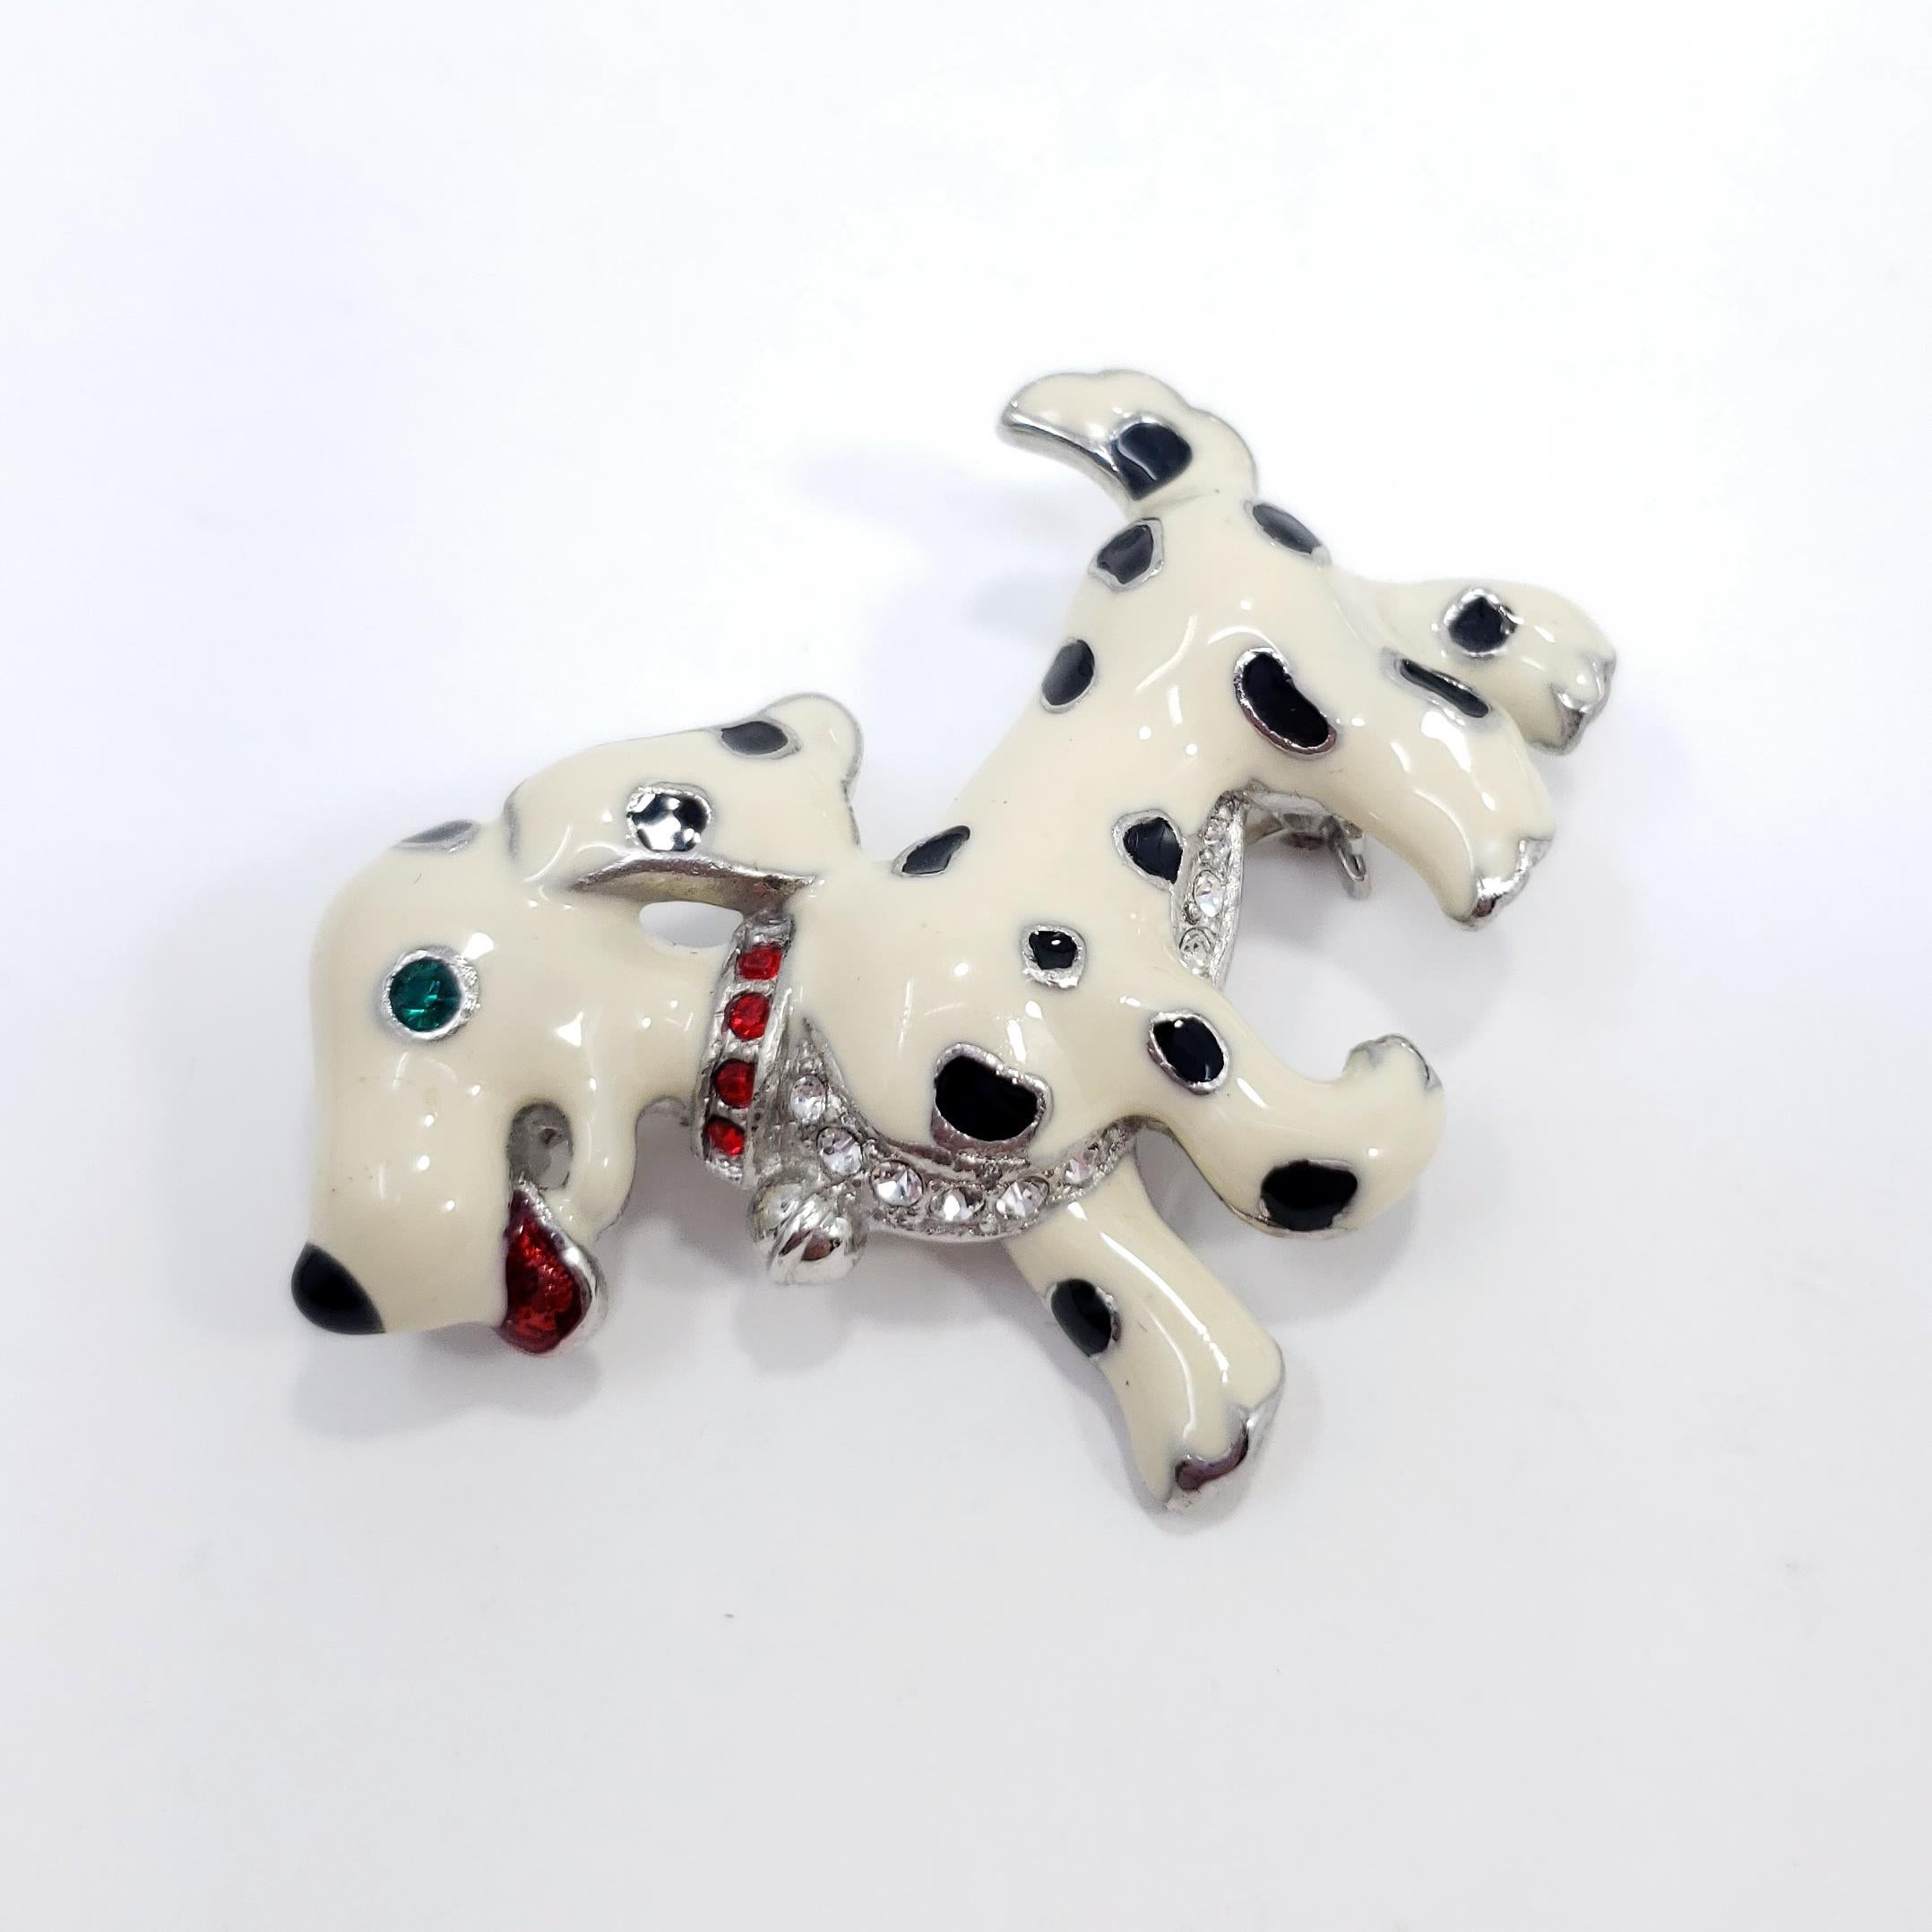 This lively dalmatian puppy is painted with black & white enamel and colorful crystals. Perfect for a touch of stylish liveliness!

Silver-tone. Circa late 1900s.